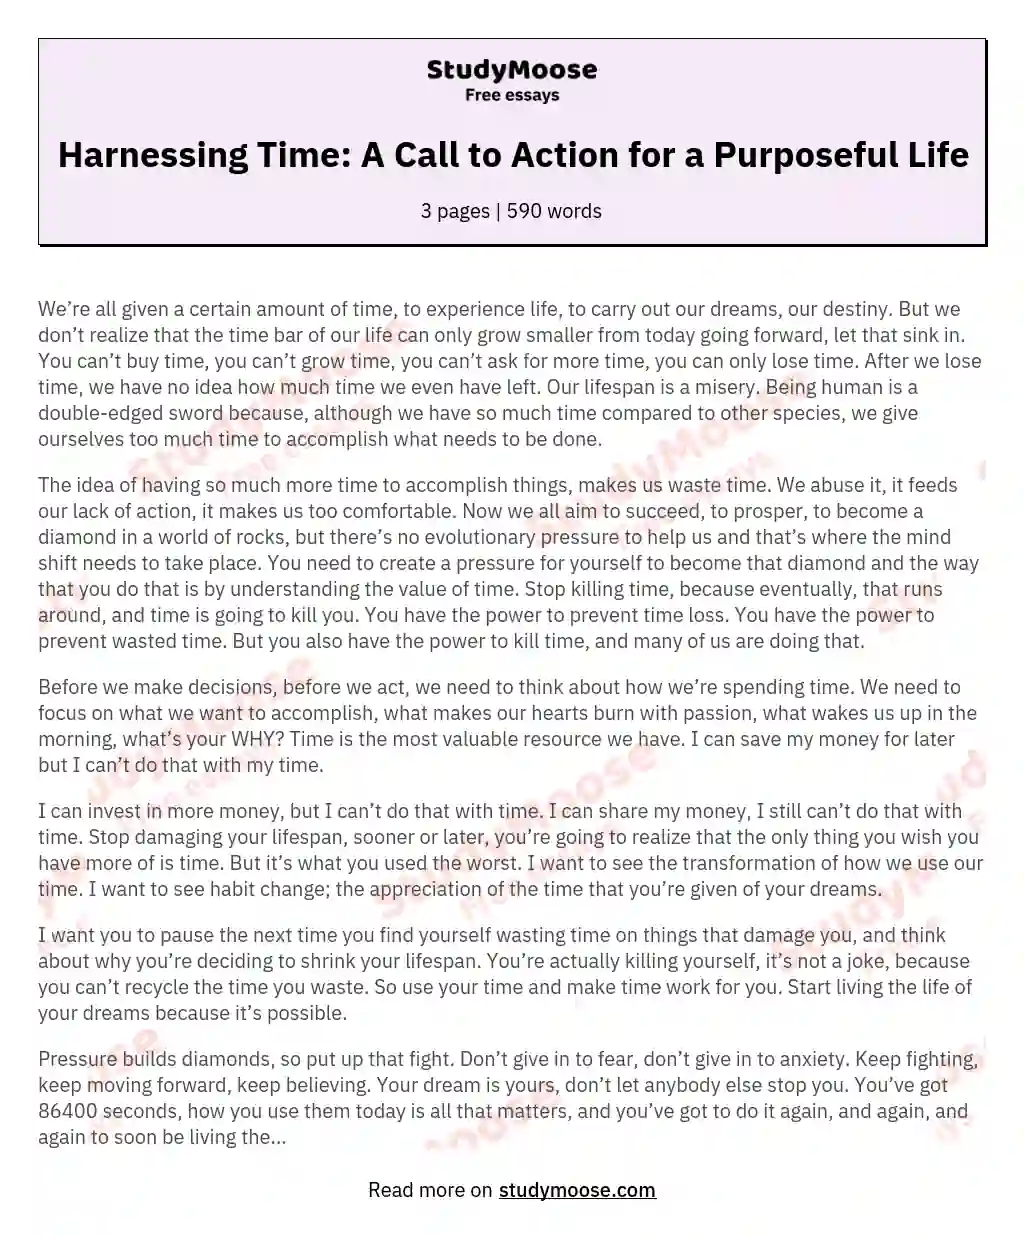 Harnessing Time: A Call to Action for a Purposeful Life essay